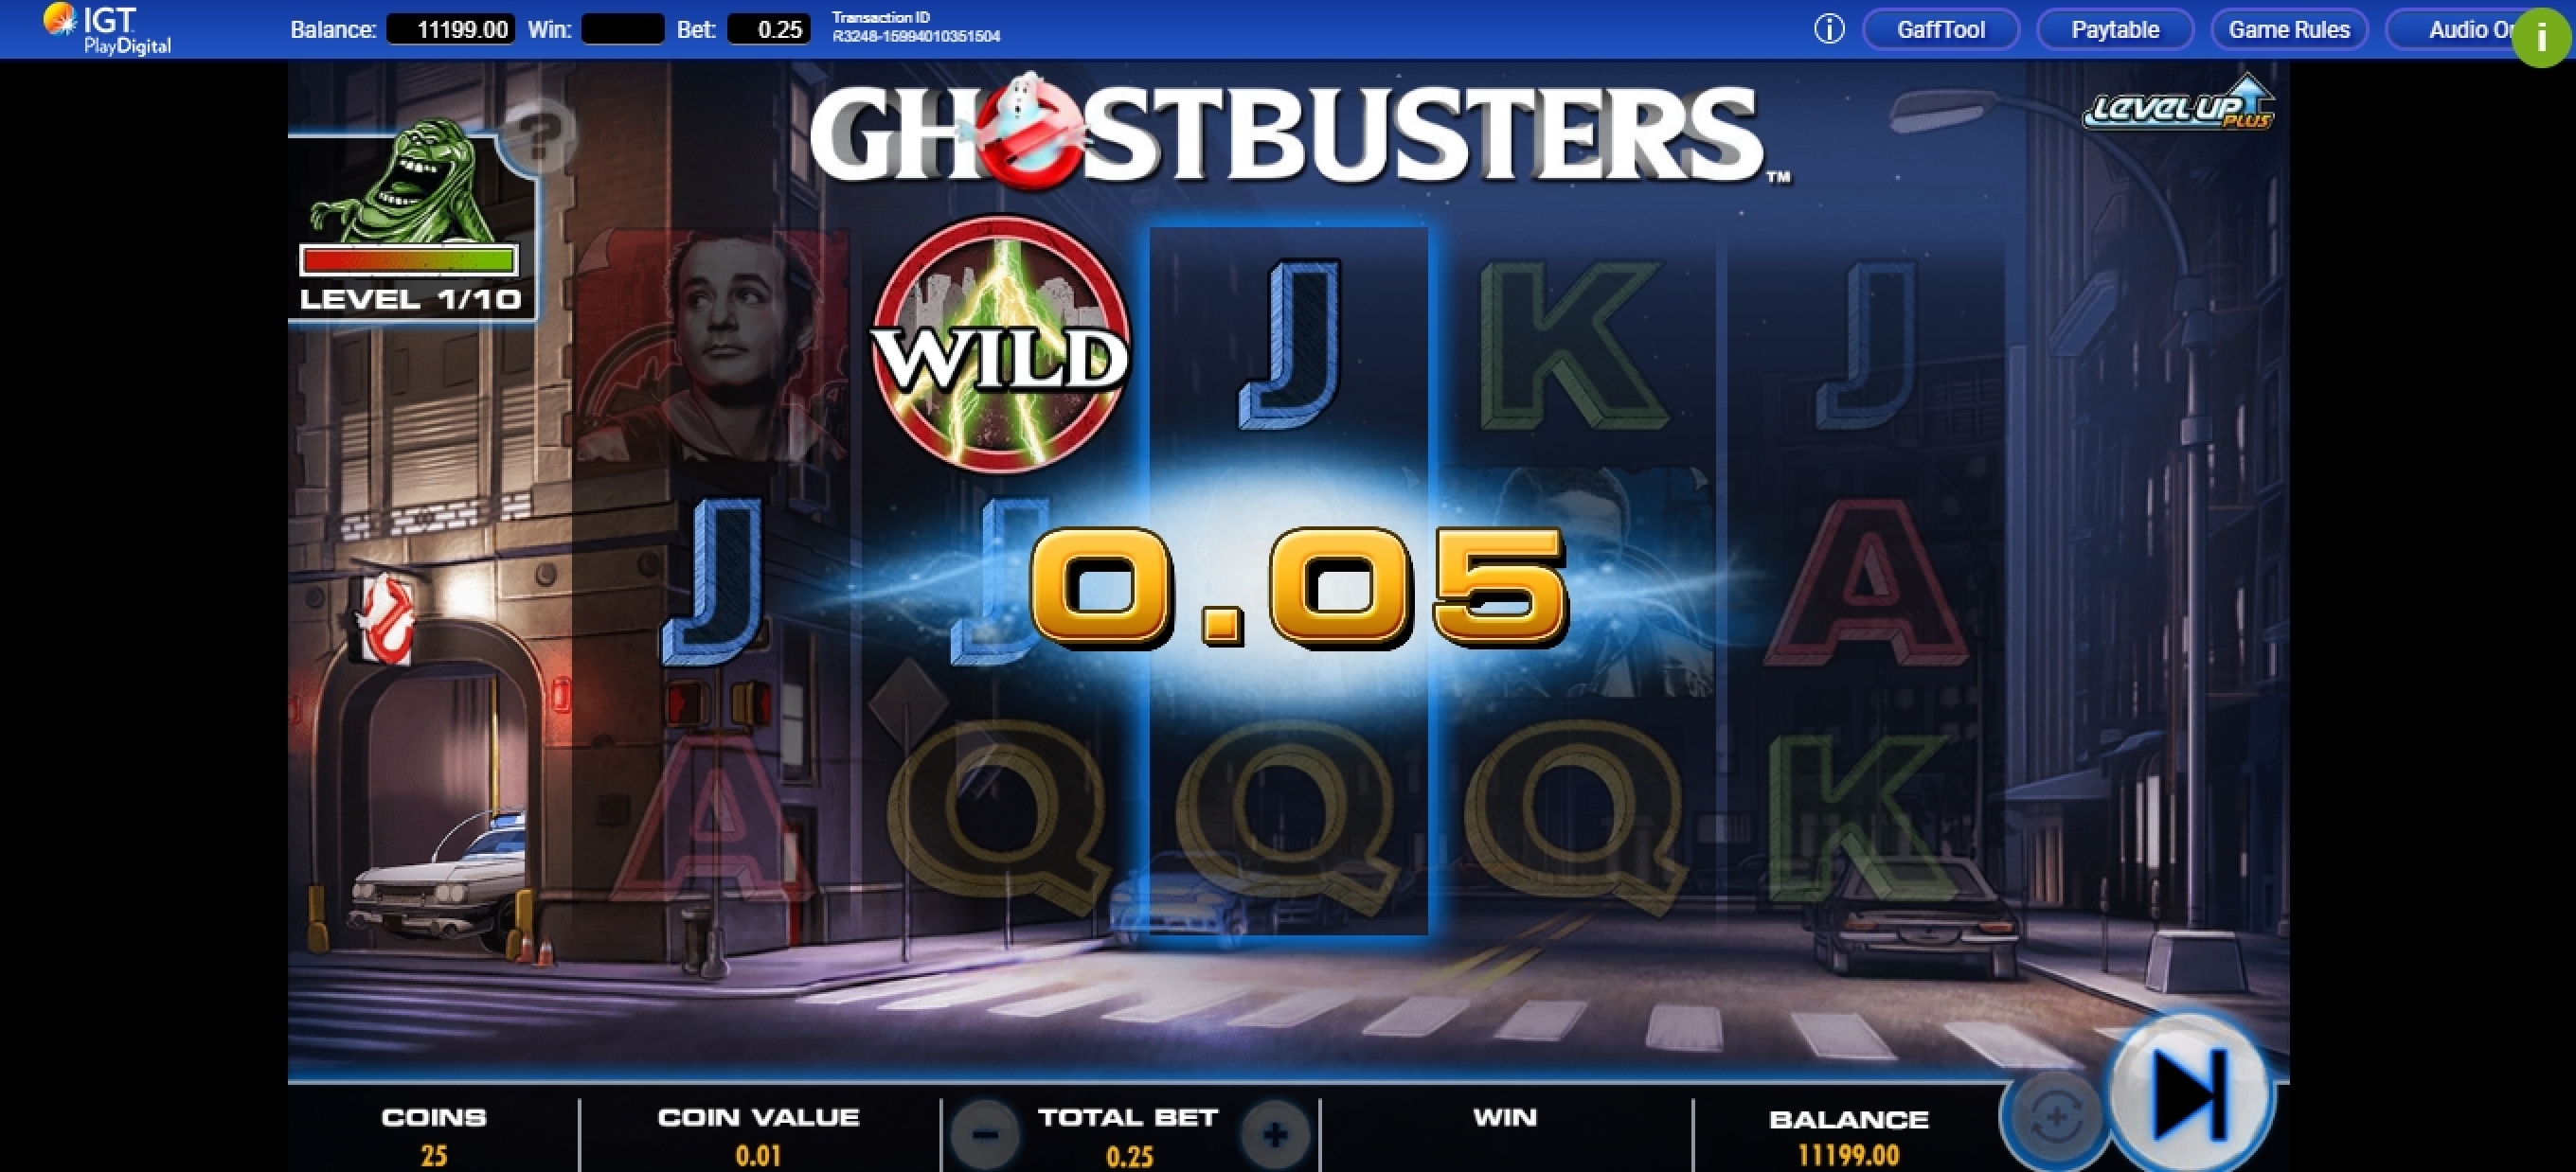 Win Money in Ghostbusters Plus Free Slot Game by IGT